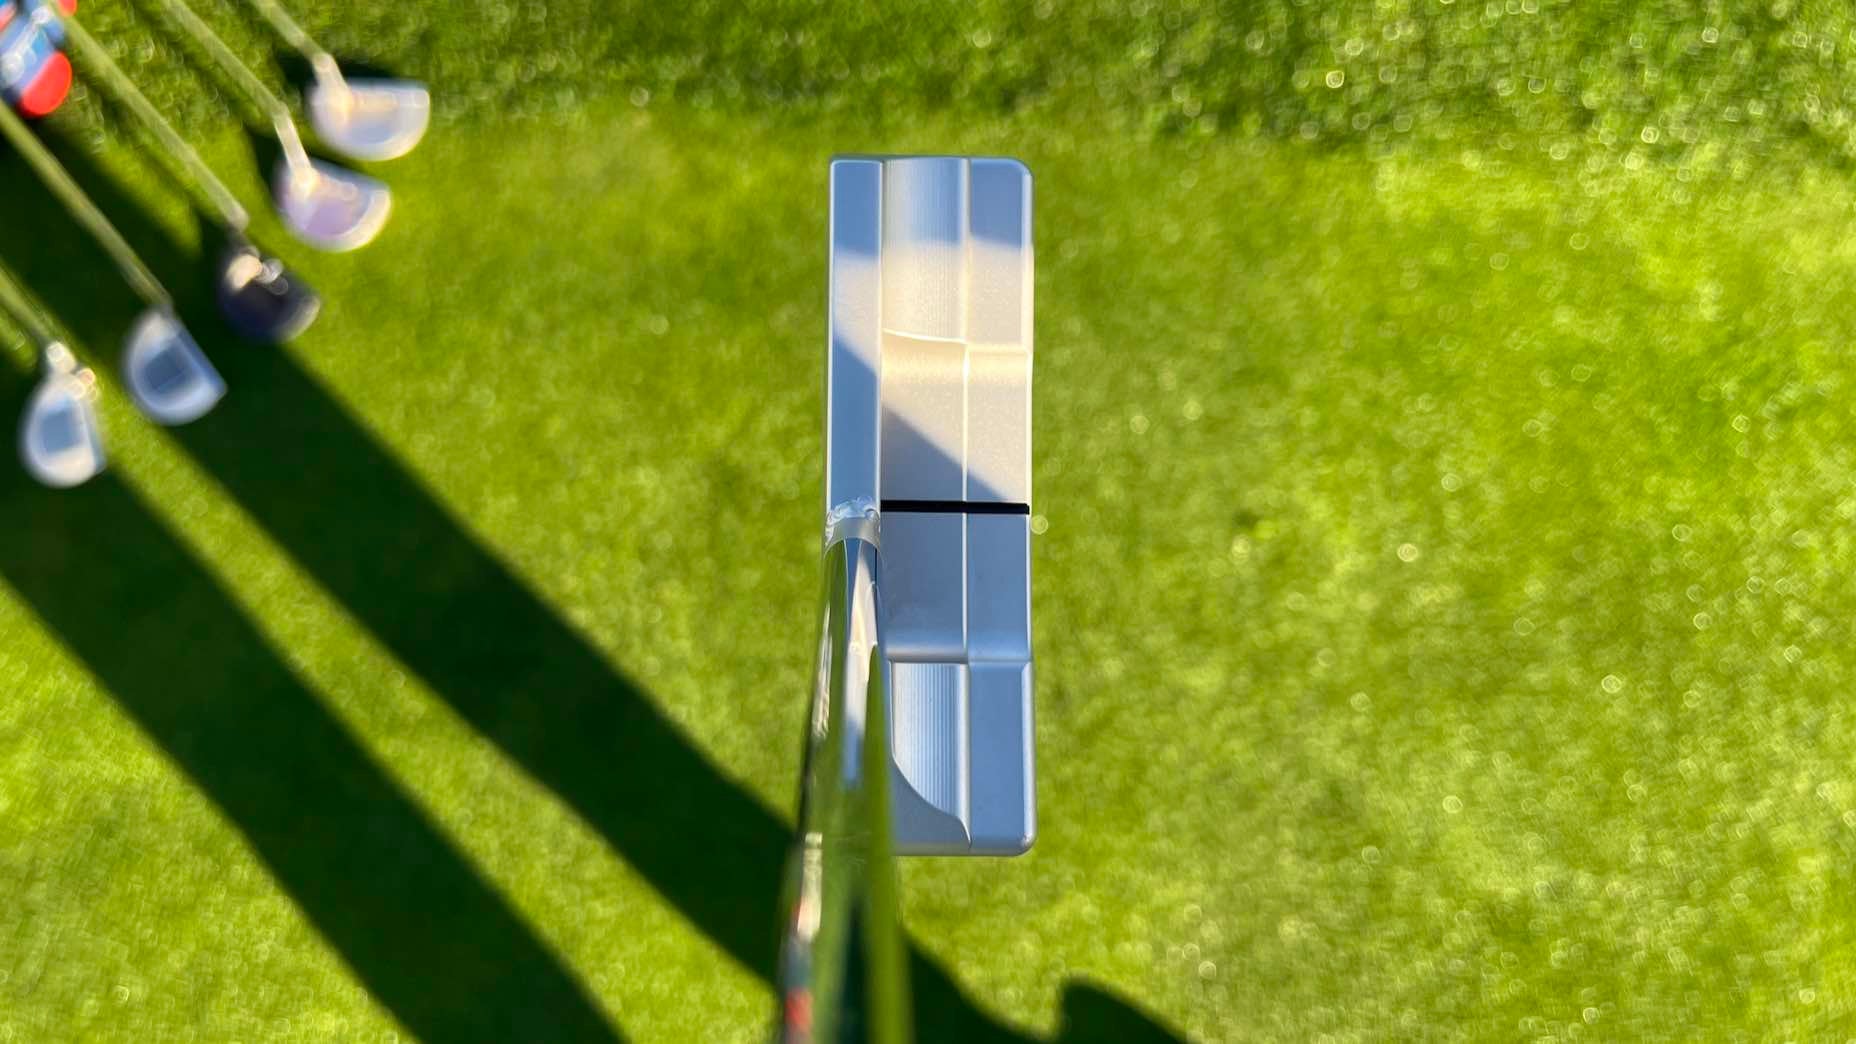 This putter style is making a surprising comeback